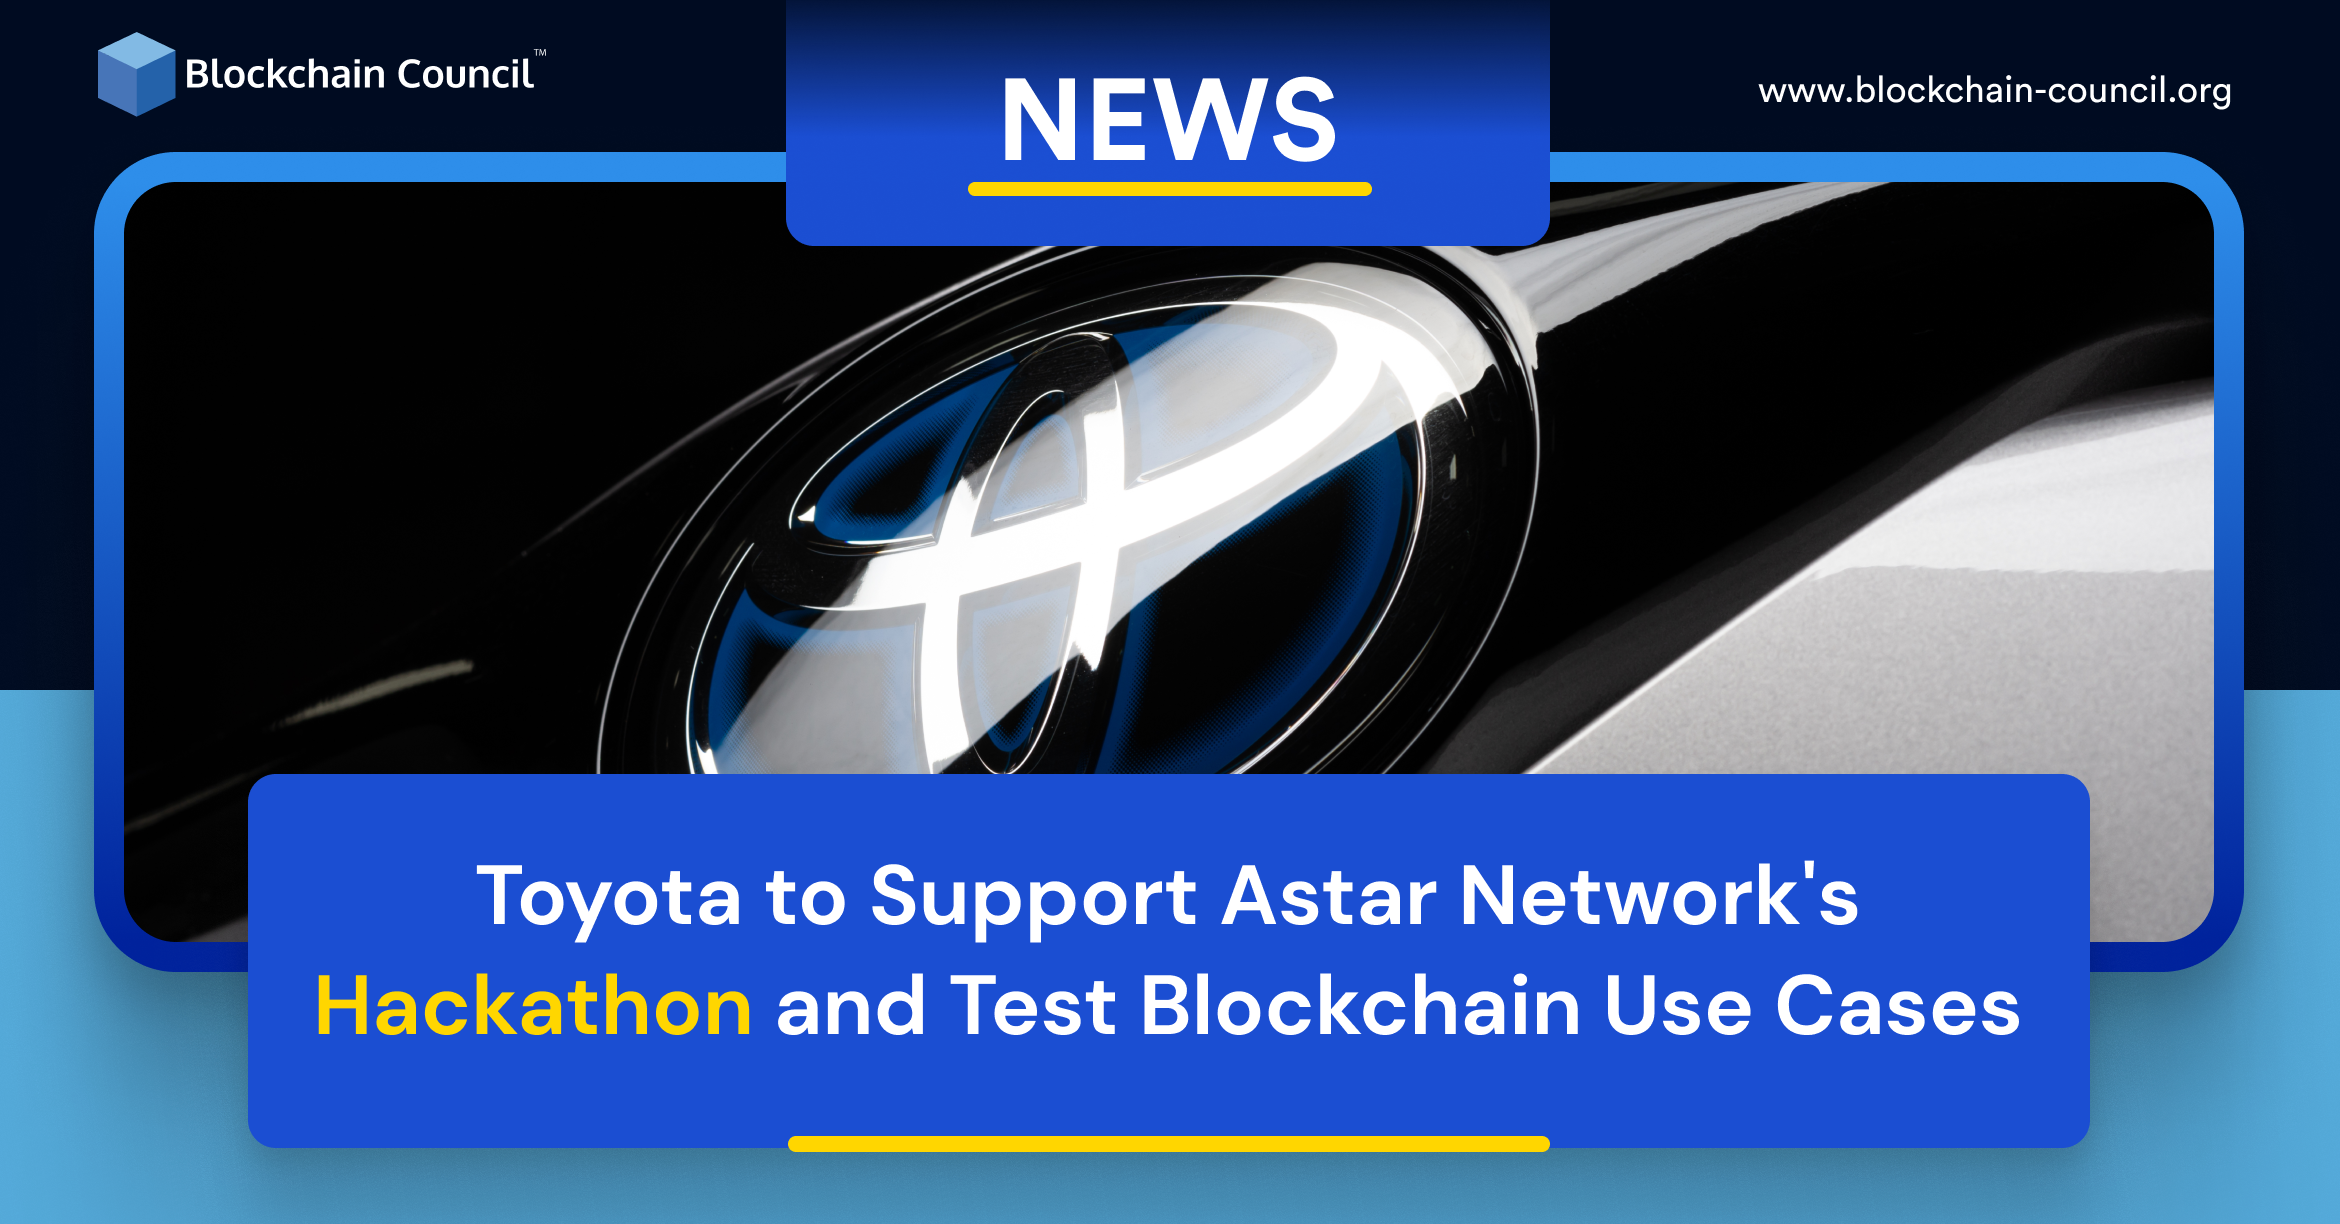 Toyota to Support Astar Network’s Hackathon and Test Blockchain Use Cases